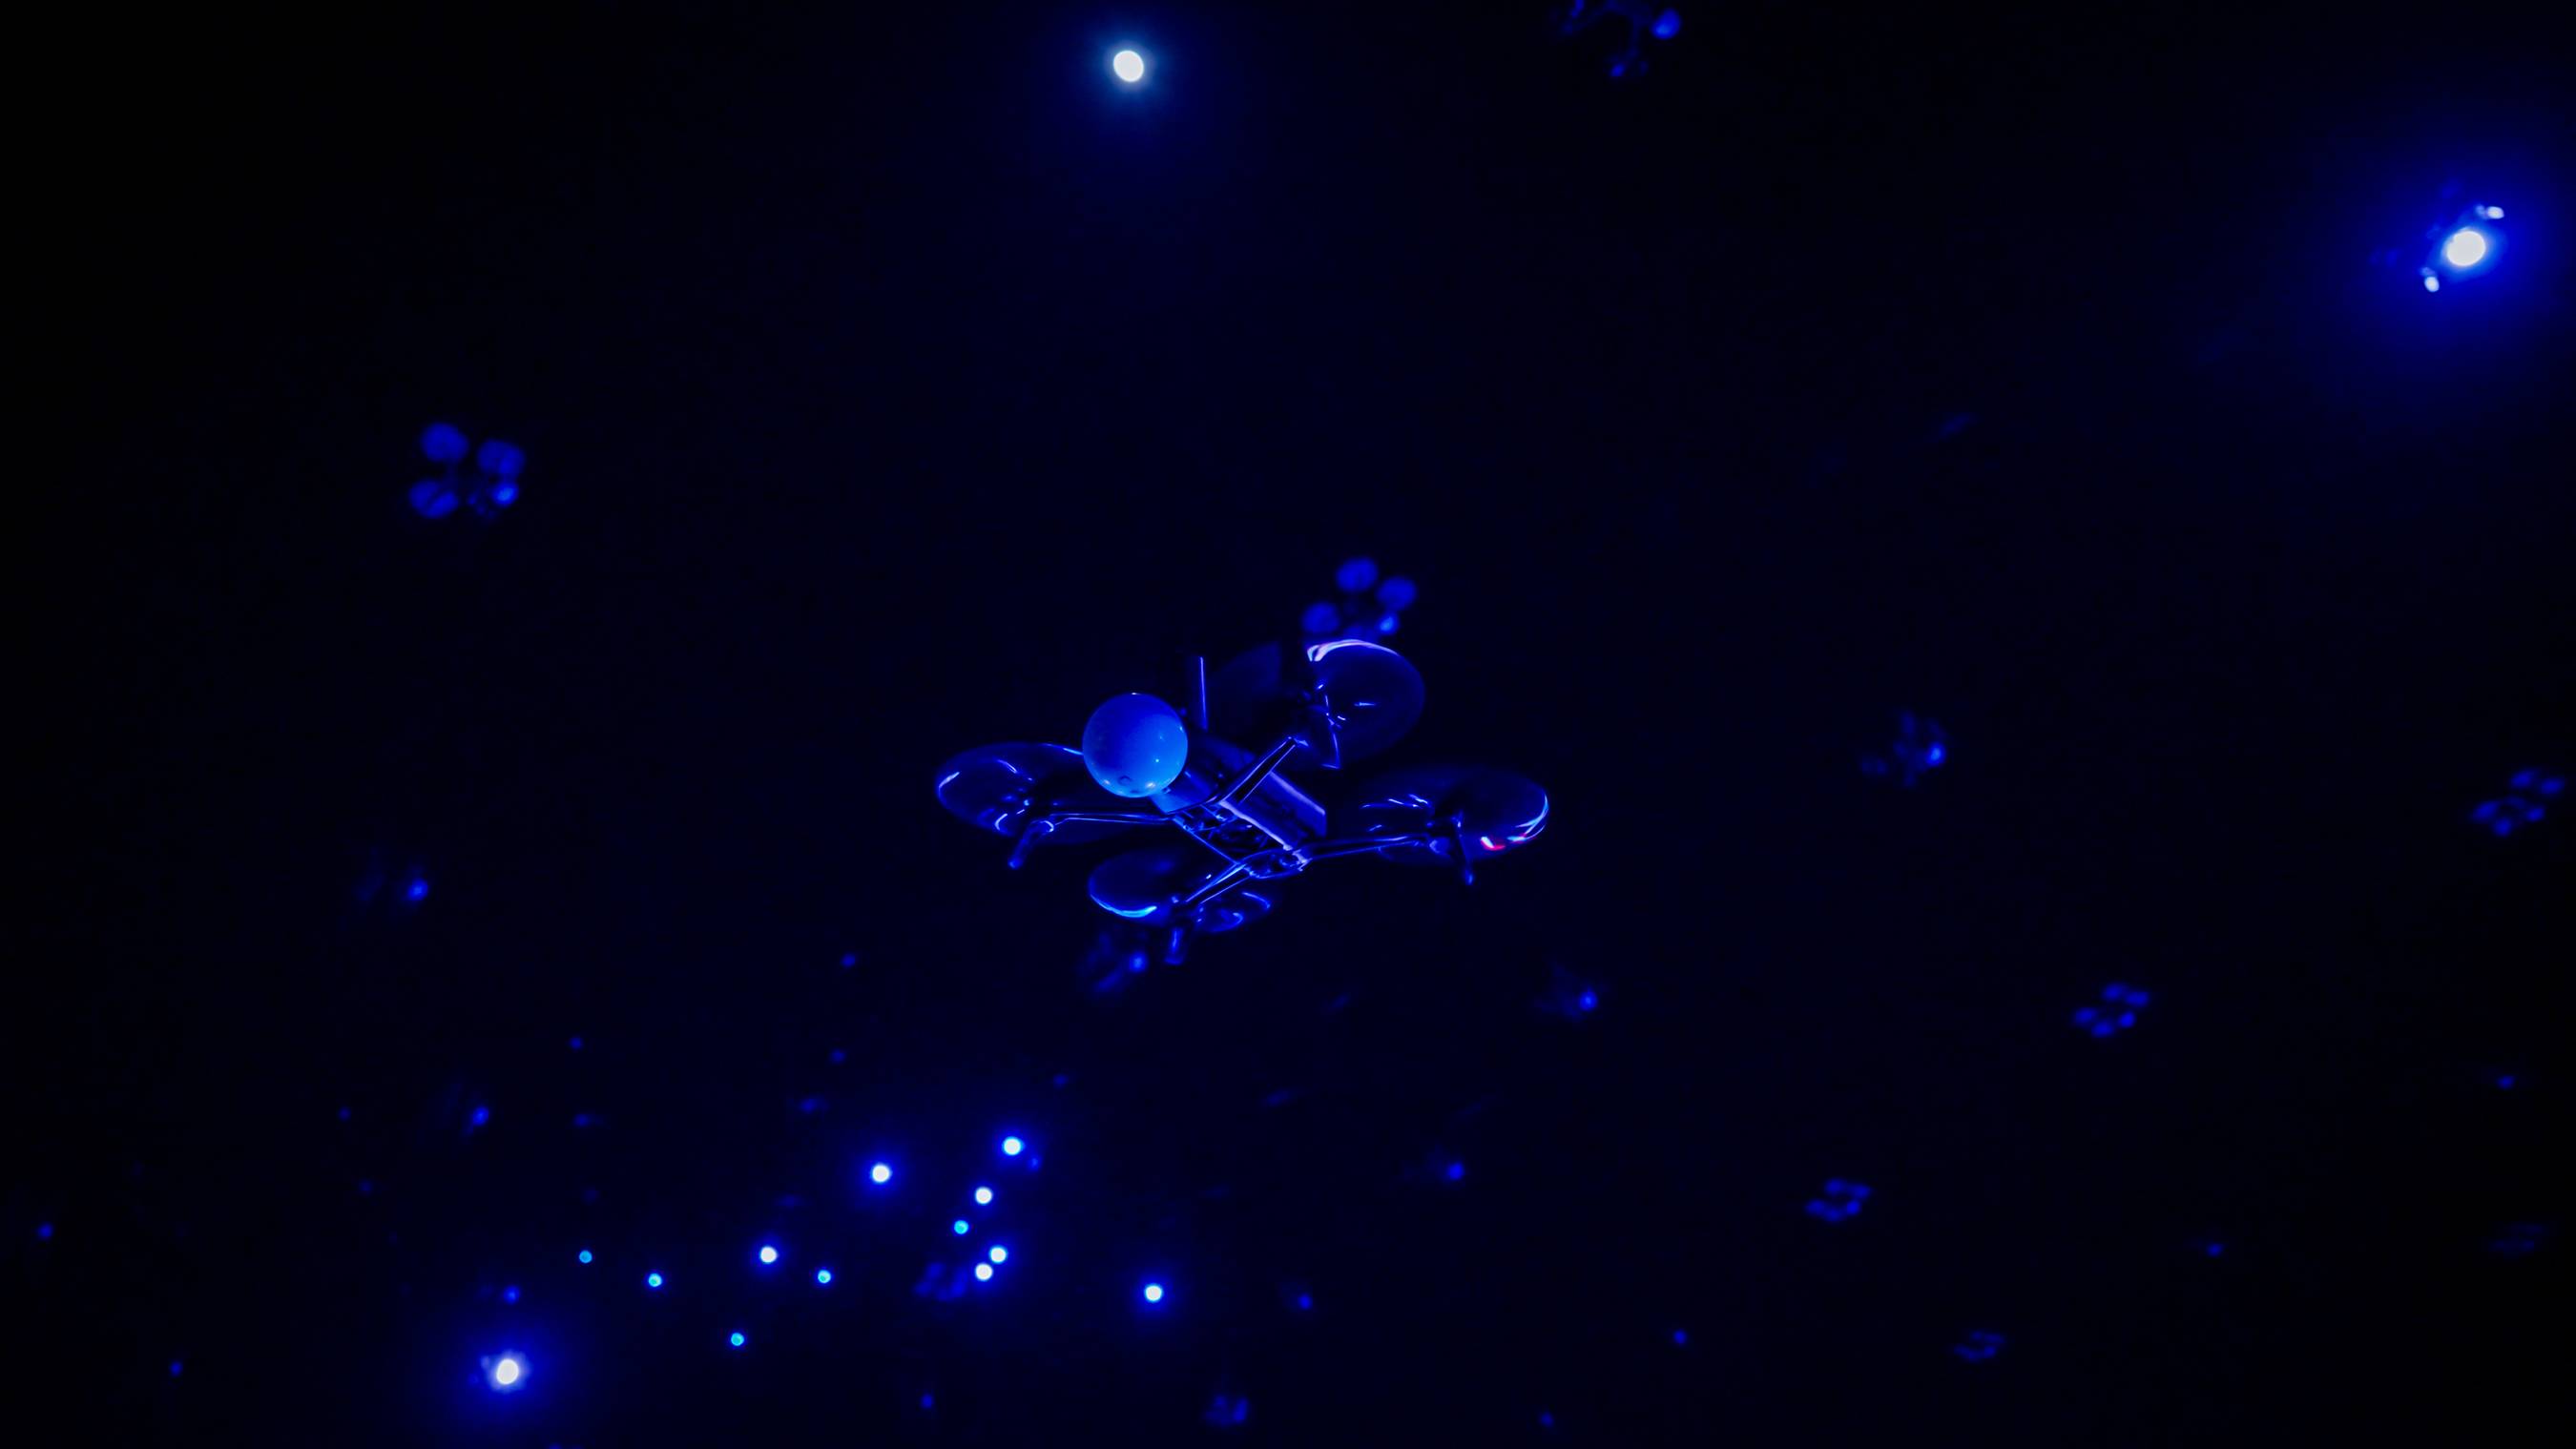 First Look at Rehearsals For 'Disney Dreams that Soar' Drone Show at Disney World